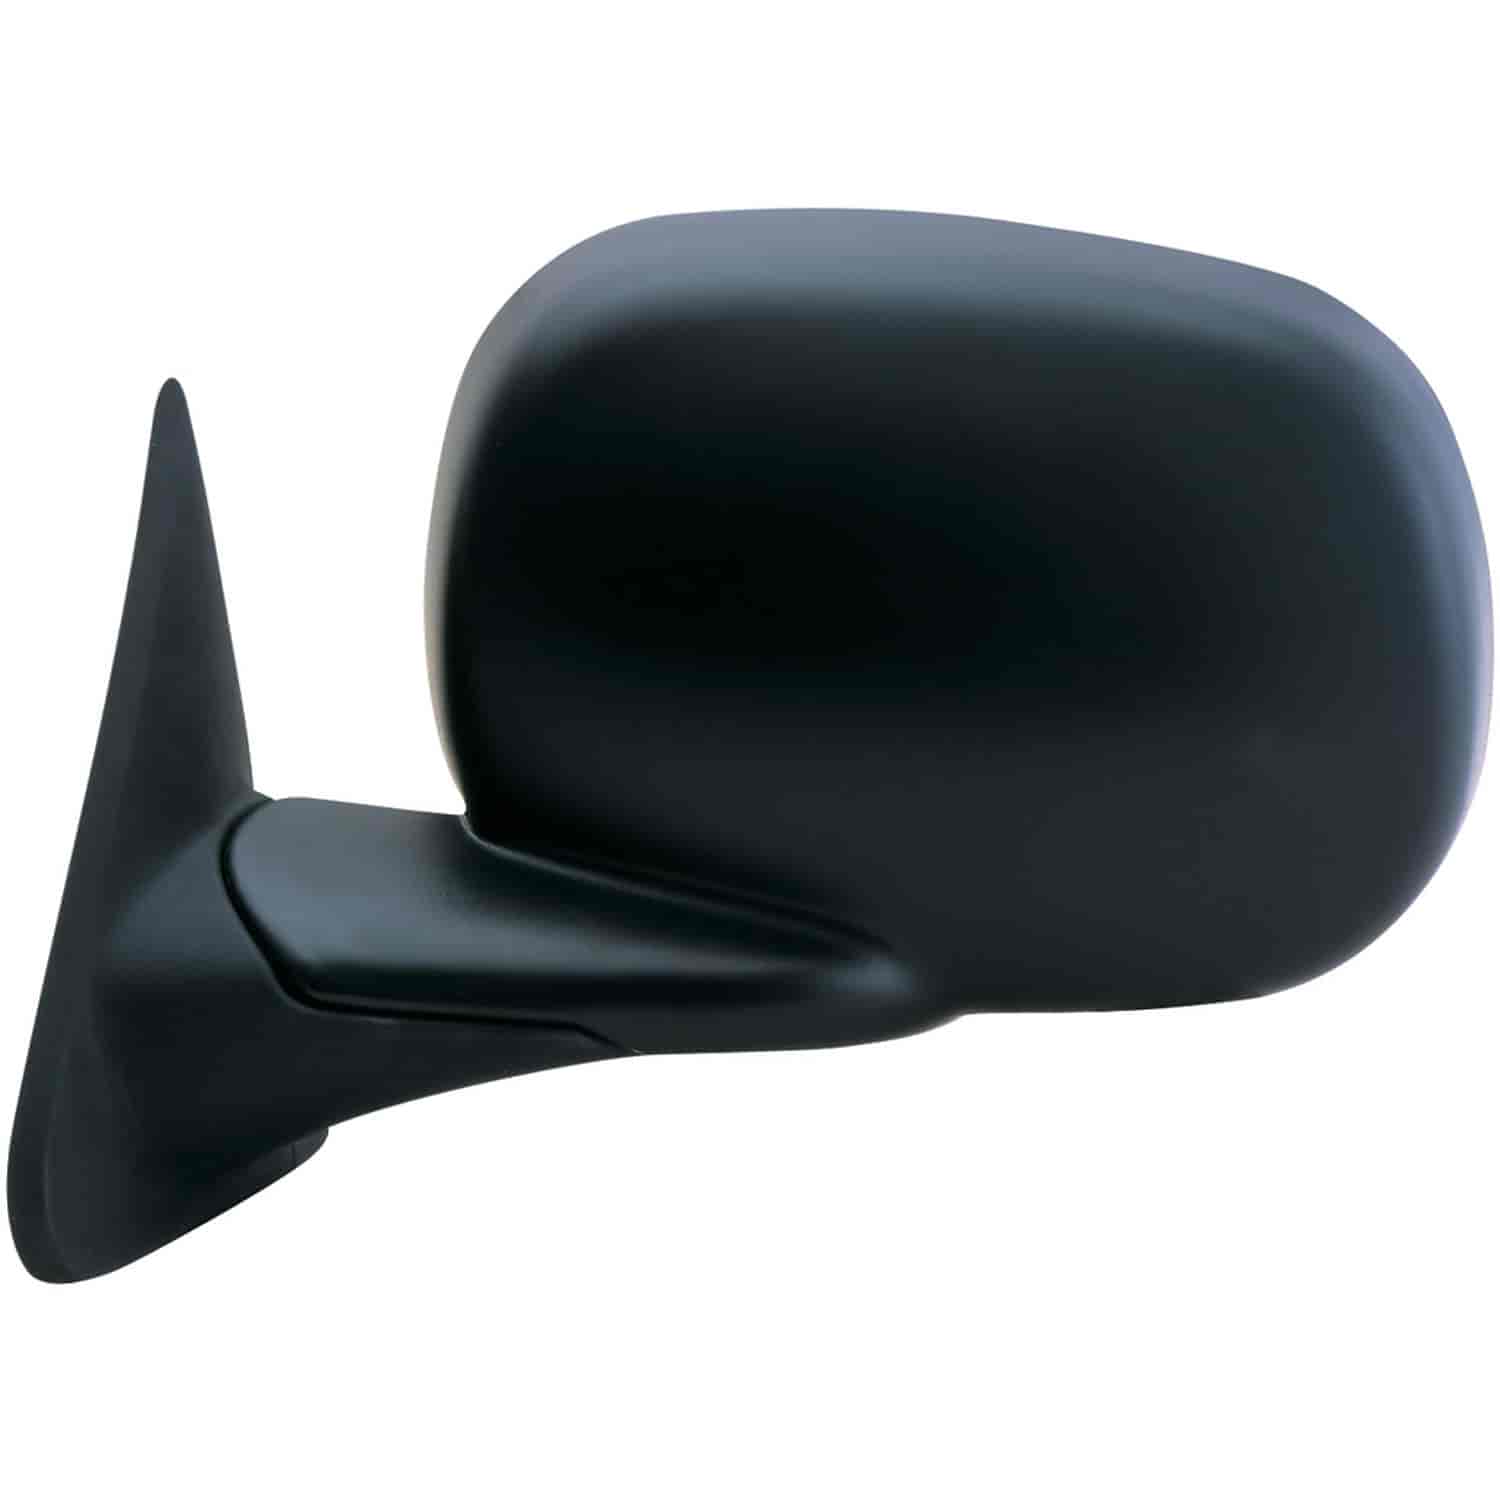 OEM Style Replacement mirror for 98-00 Dodge Pick-Up driver side mirror tested to fit and function l